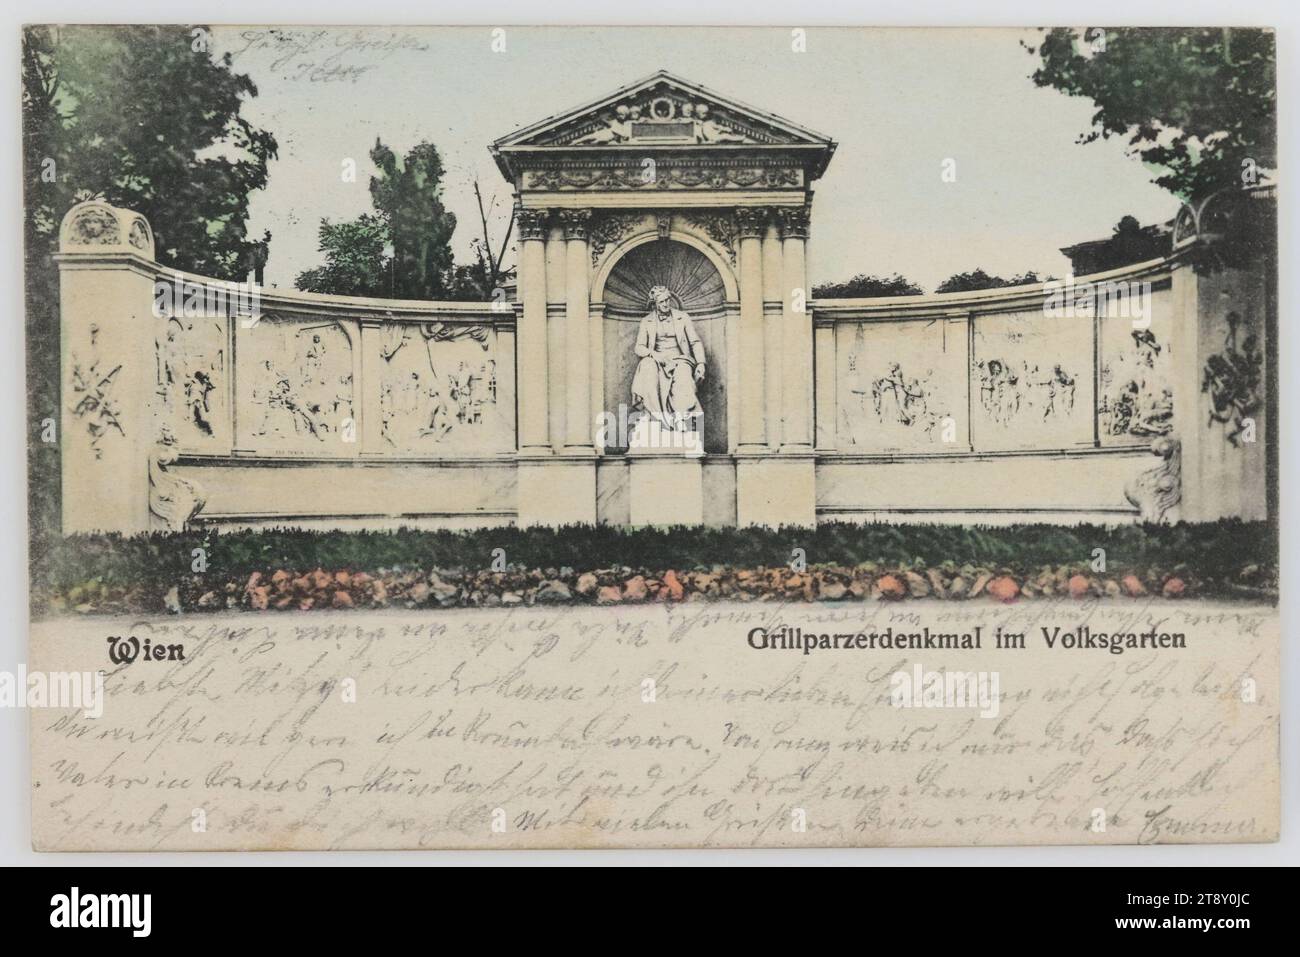 Vienna, Grillparzerdenkmal im Volksgarten, Brüder Kohn KG (B. K. W. I.), Producer, 1902, paperboard, hand colorised, Collotype, Inscription, FROM, Vienna, TO, Krumbach, ADDRESS, Hochwolgeboren, Frau, Krumbach, bei Edlitz Nied. Oest, Lindenhof, MESSAGE, Dearest Mitzy! Unfortunately, I cannot accept your kind invitation. You know how much I would like to be in Krumbach. All I know about Franz is that father has made inquiries in Krems and wants to send him there. I hope you are well. With many greetings from your most devoted Emma Stock Photo